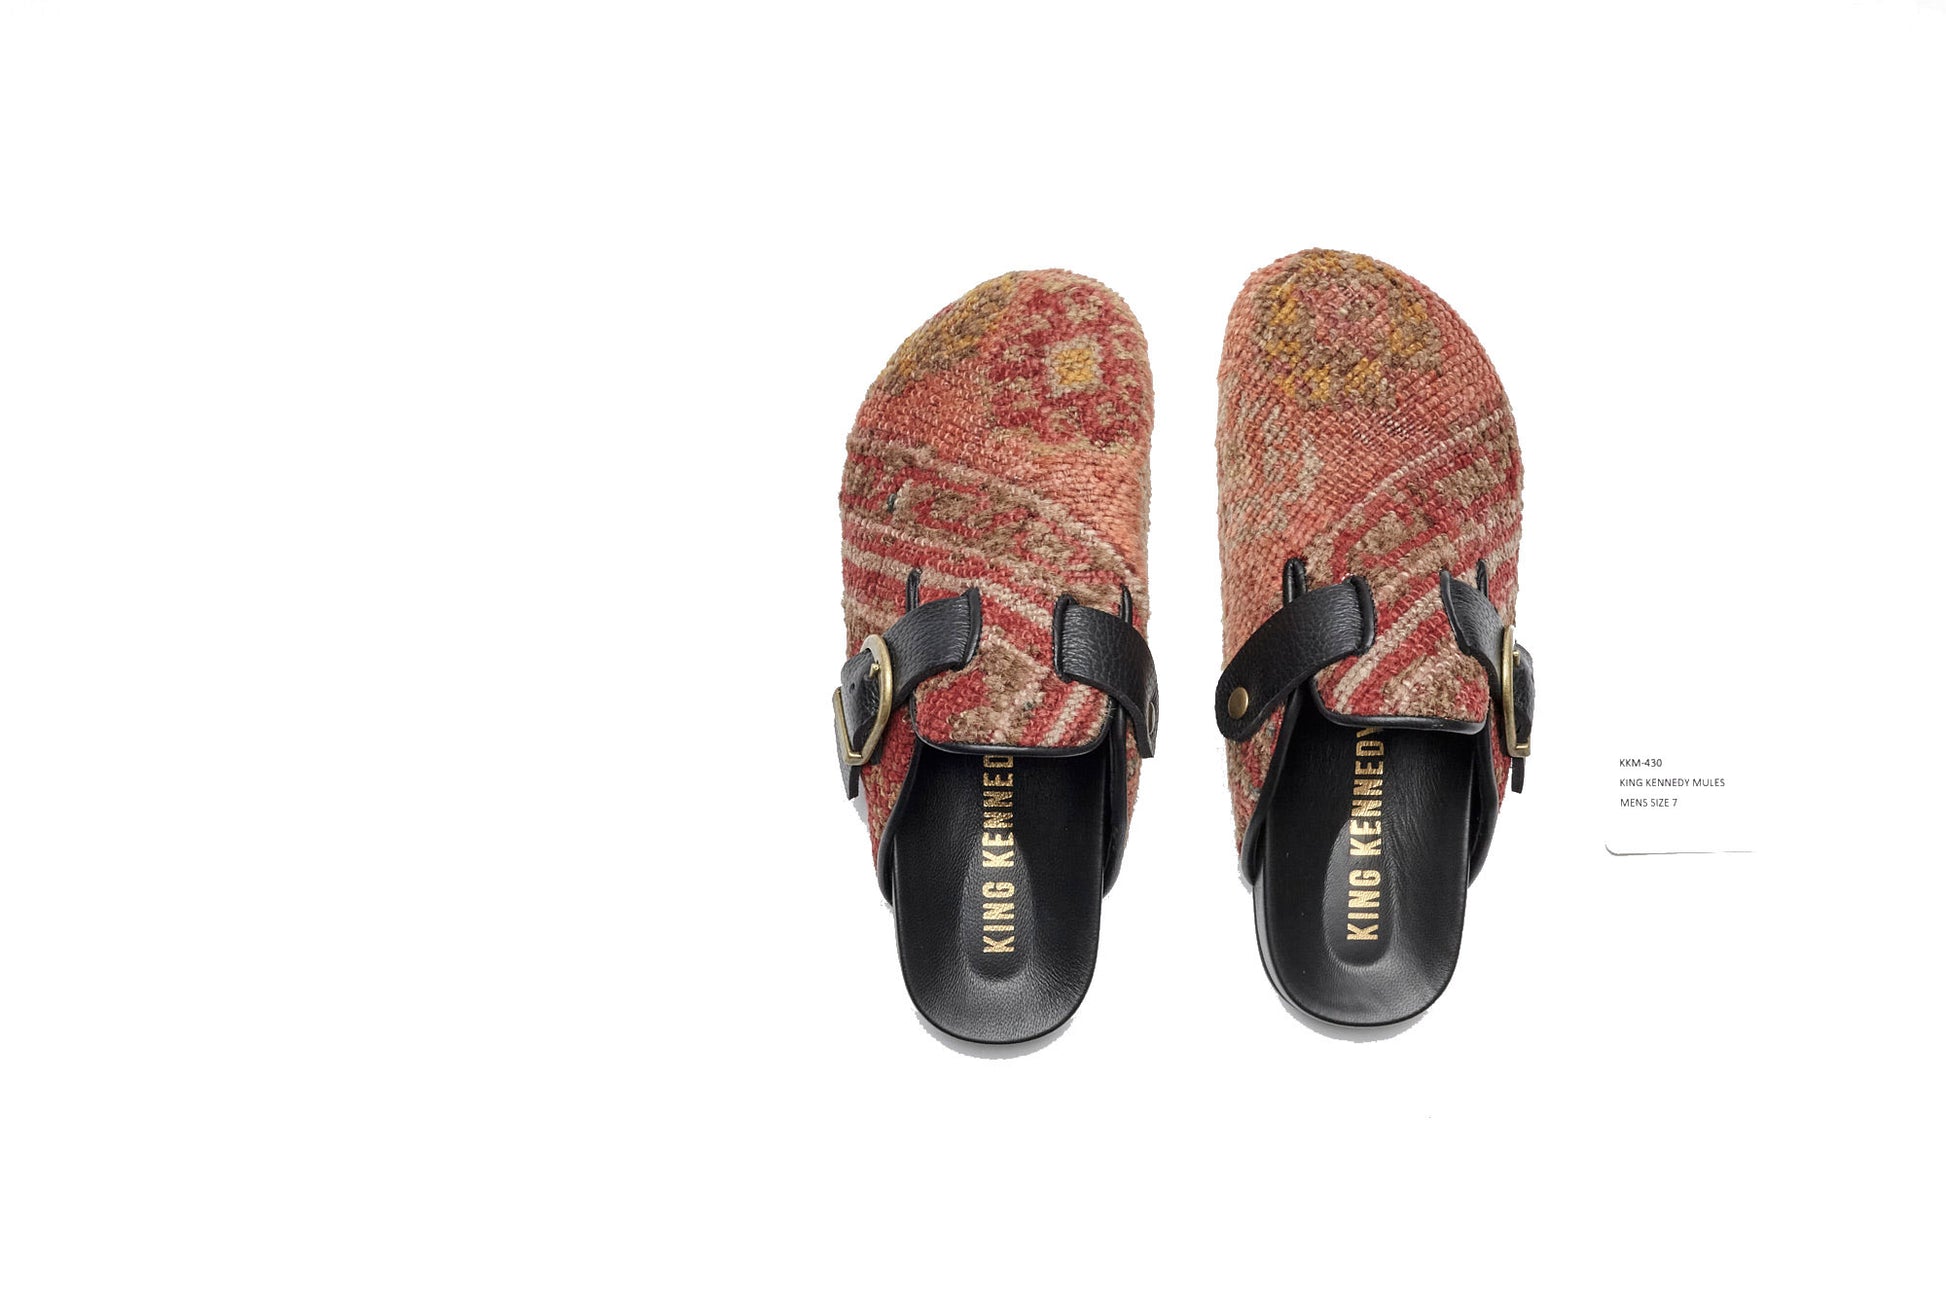 King Kennedy Rug Mules are one-of-a-kind and made of 100 year old antique Persian rug fragments with soft lambskin footbed and comfortable rubber sole. This pair is made of an antique hand knotted Persian rug with pink, red and yellow tones. 